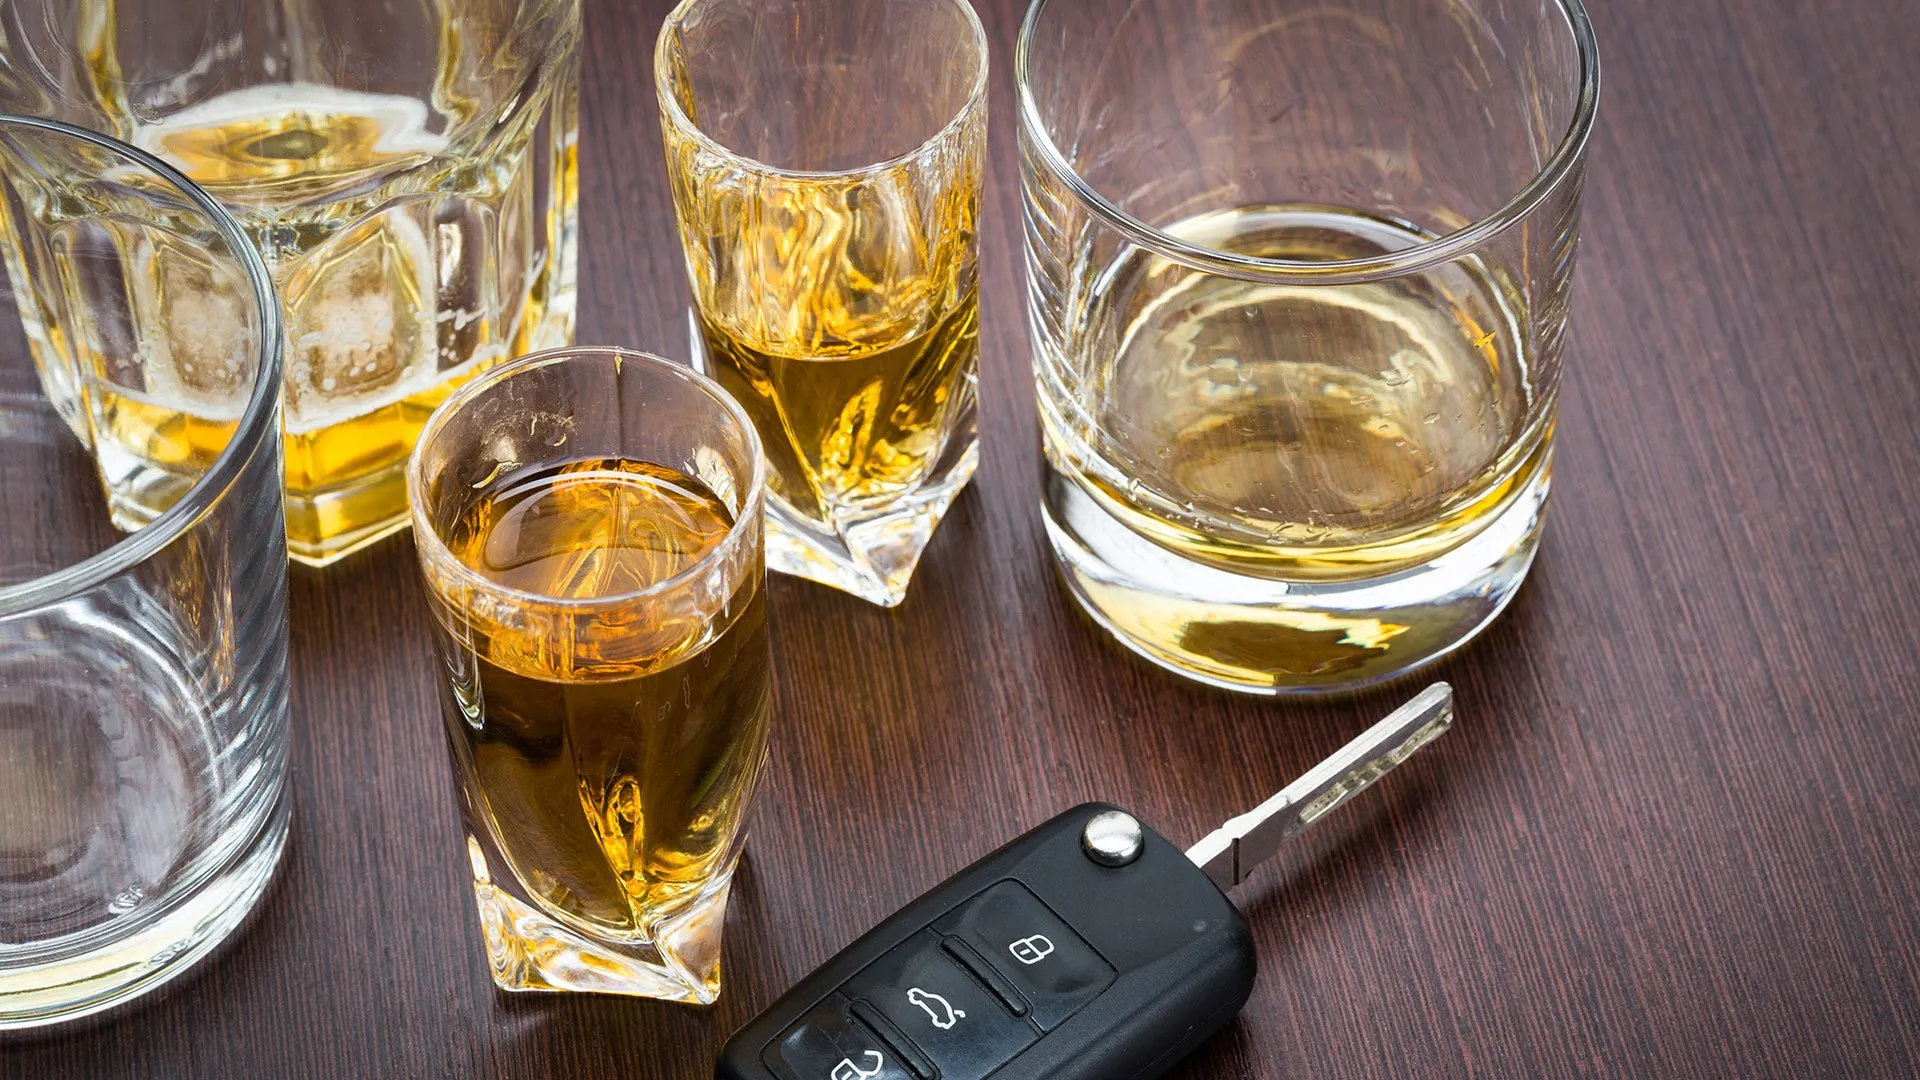 Drunk Driving and DUI Accidents